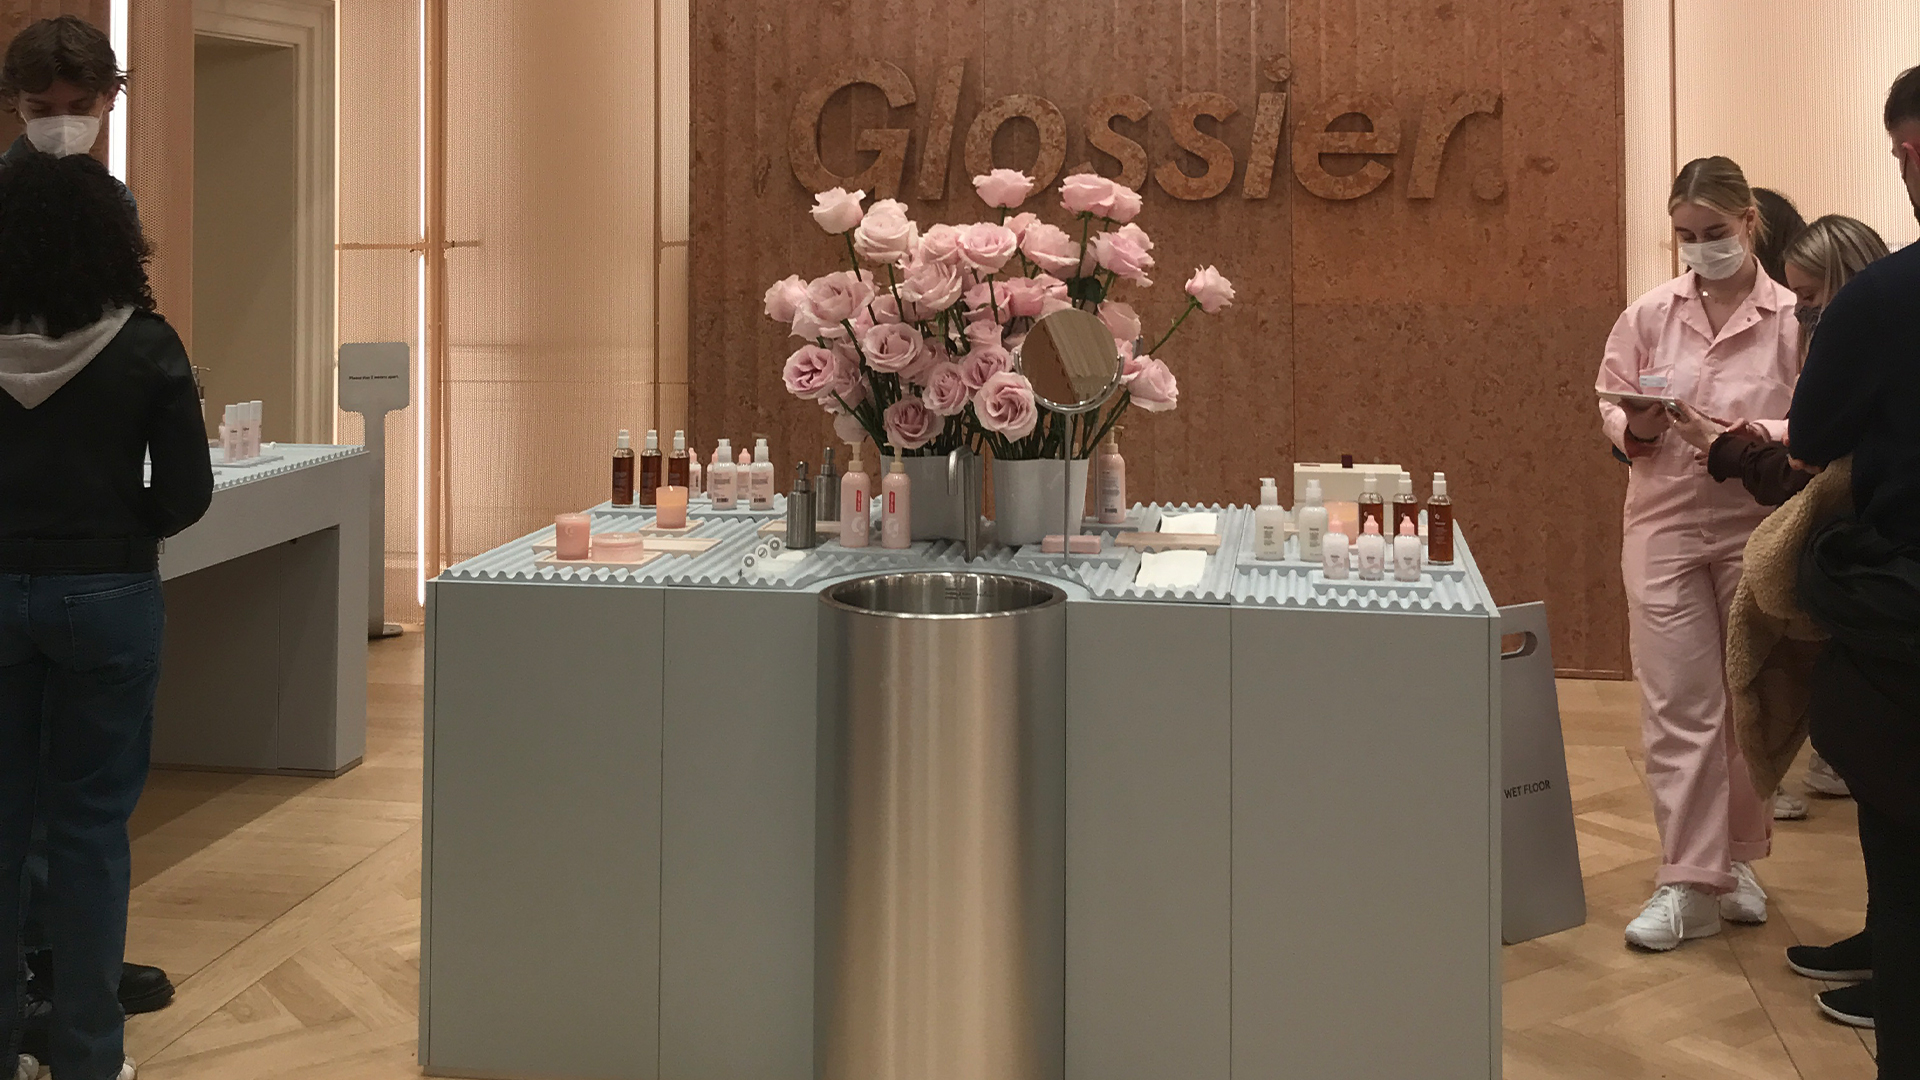 Glossier flagship store London